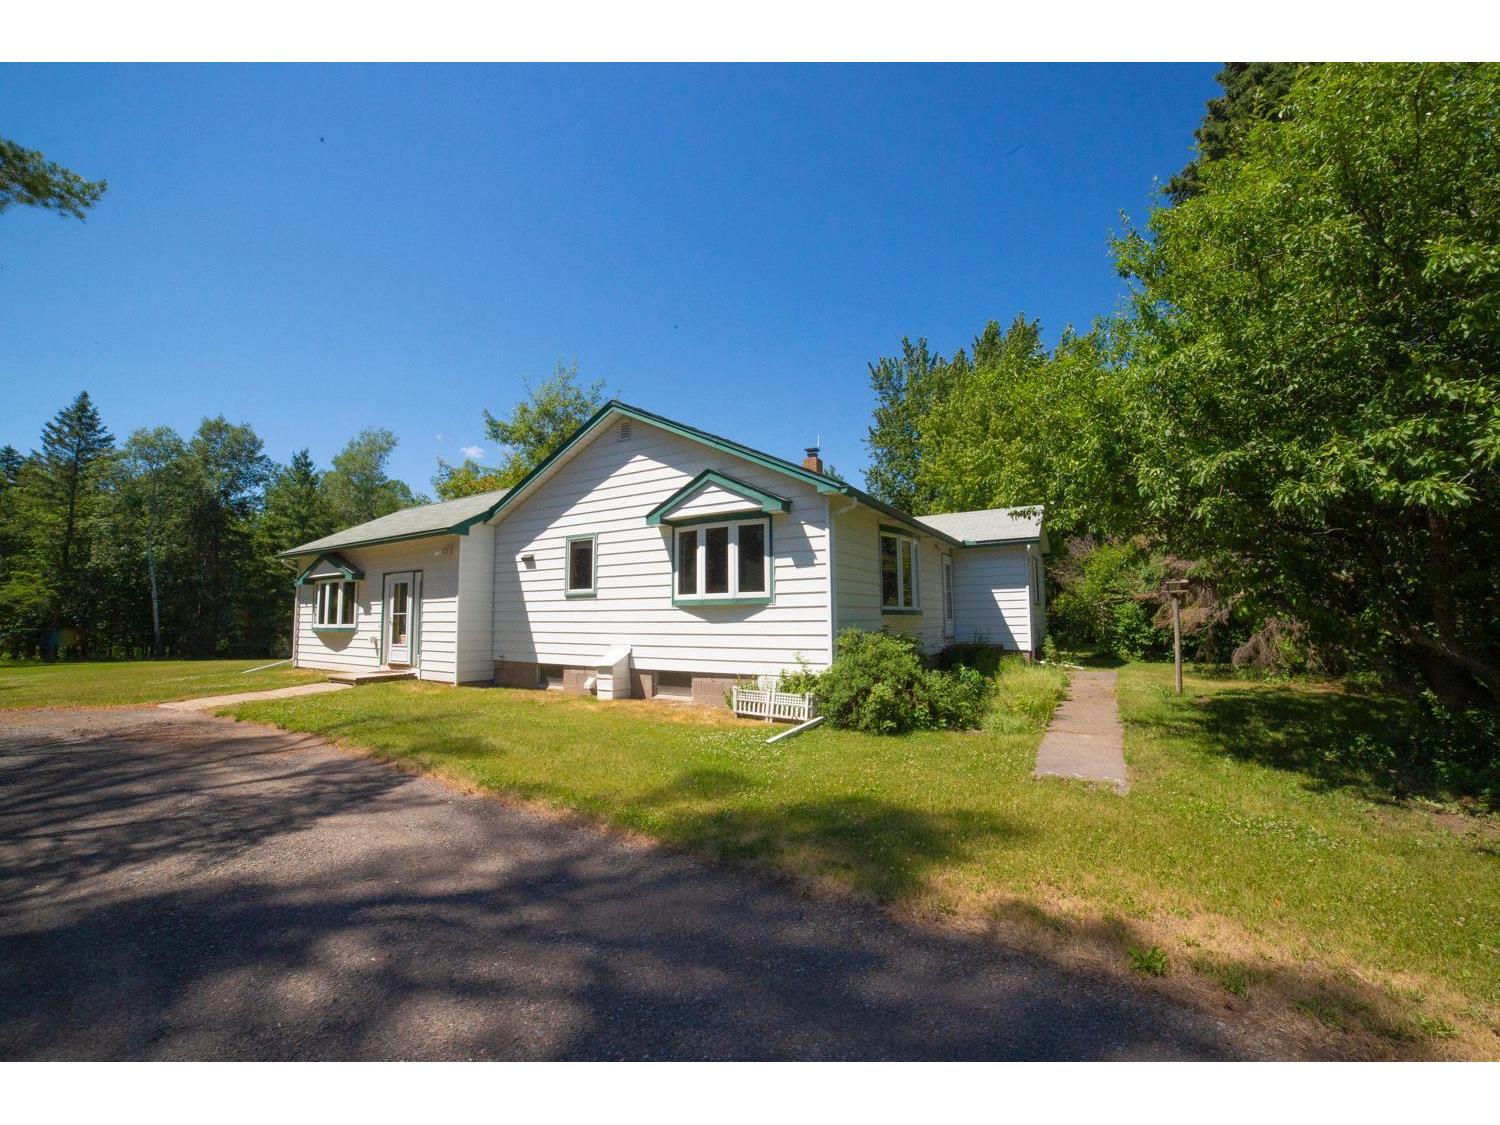 7255 Hwy 5 Floodwood MN 55736 - Whiteface 6016943 image1